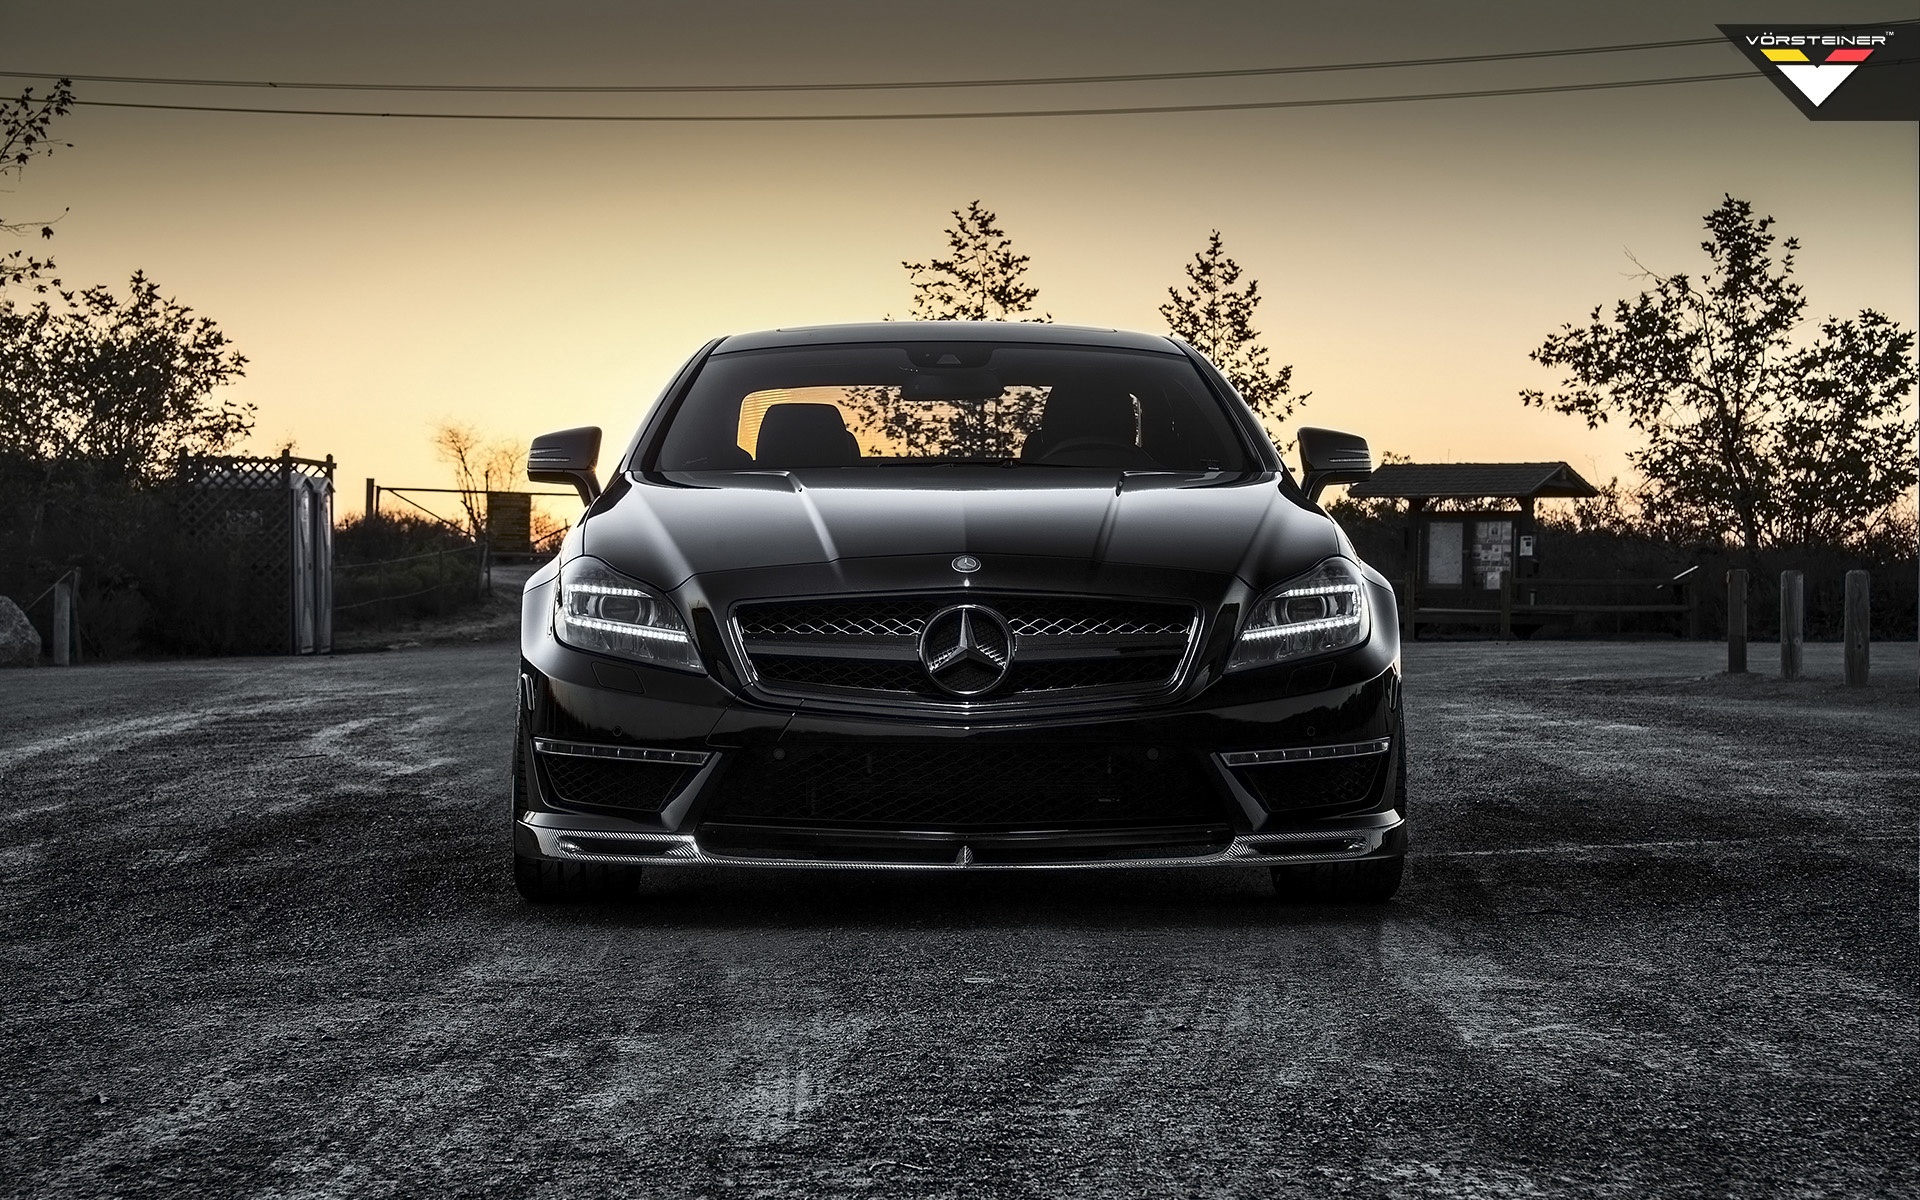 Mercedes Benz Wallpaper And Background Image